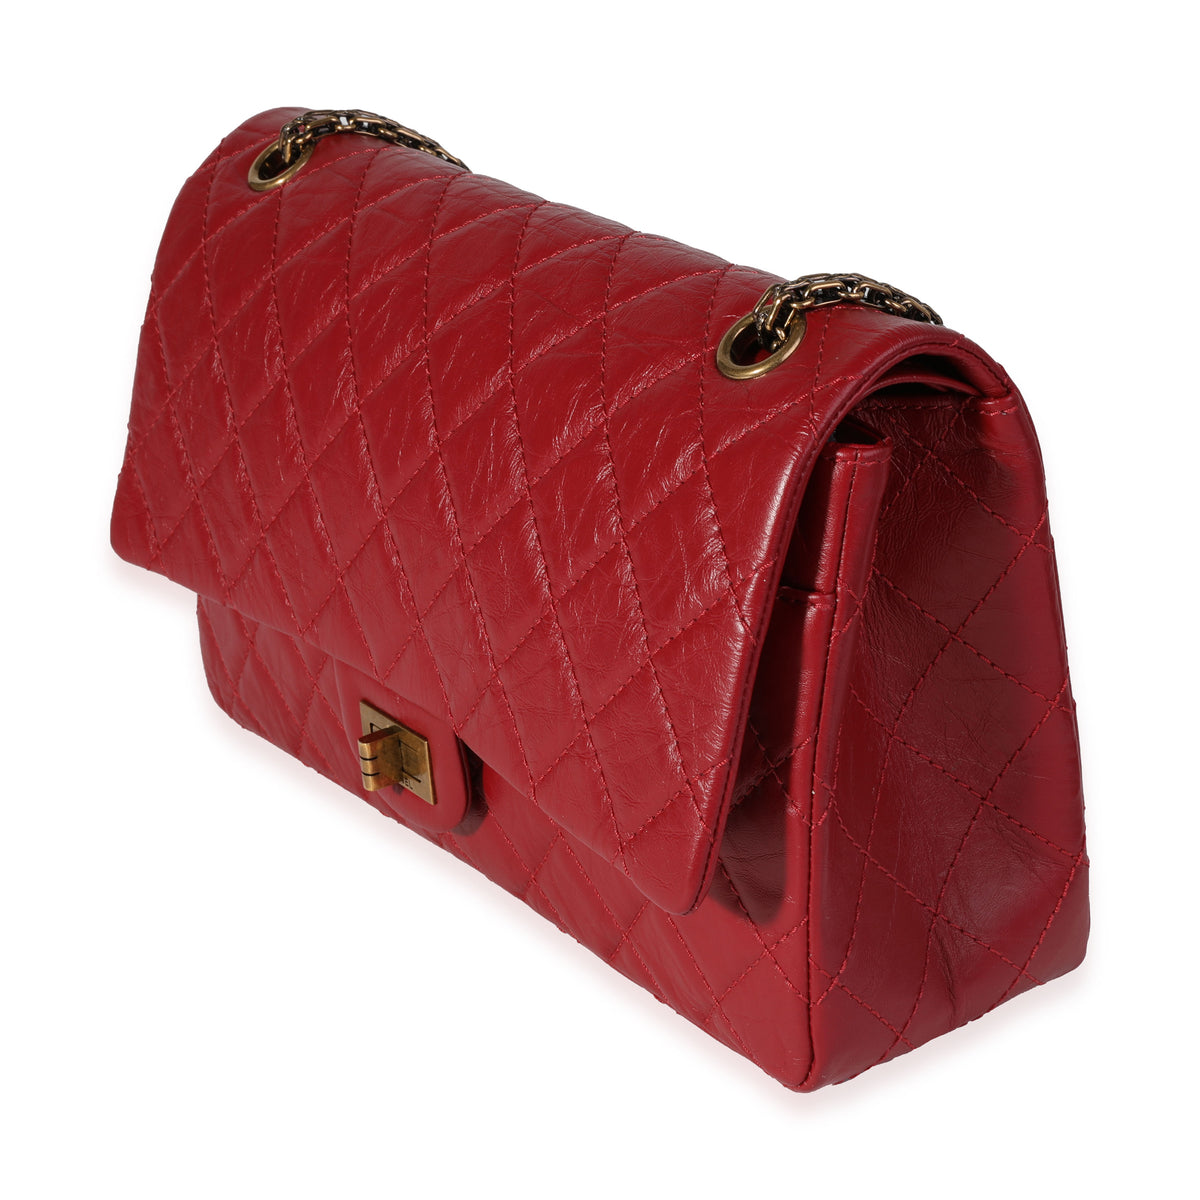 Chanel Red Quilted Aged Calfskin Reissue 2.55 226 Double Flap Bag, myGemma